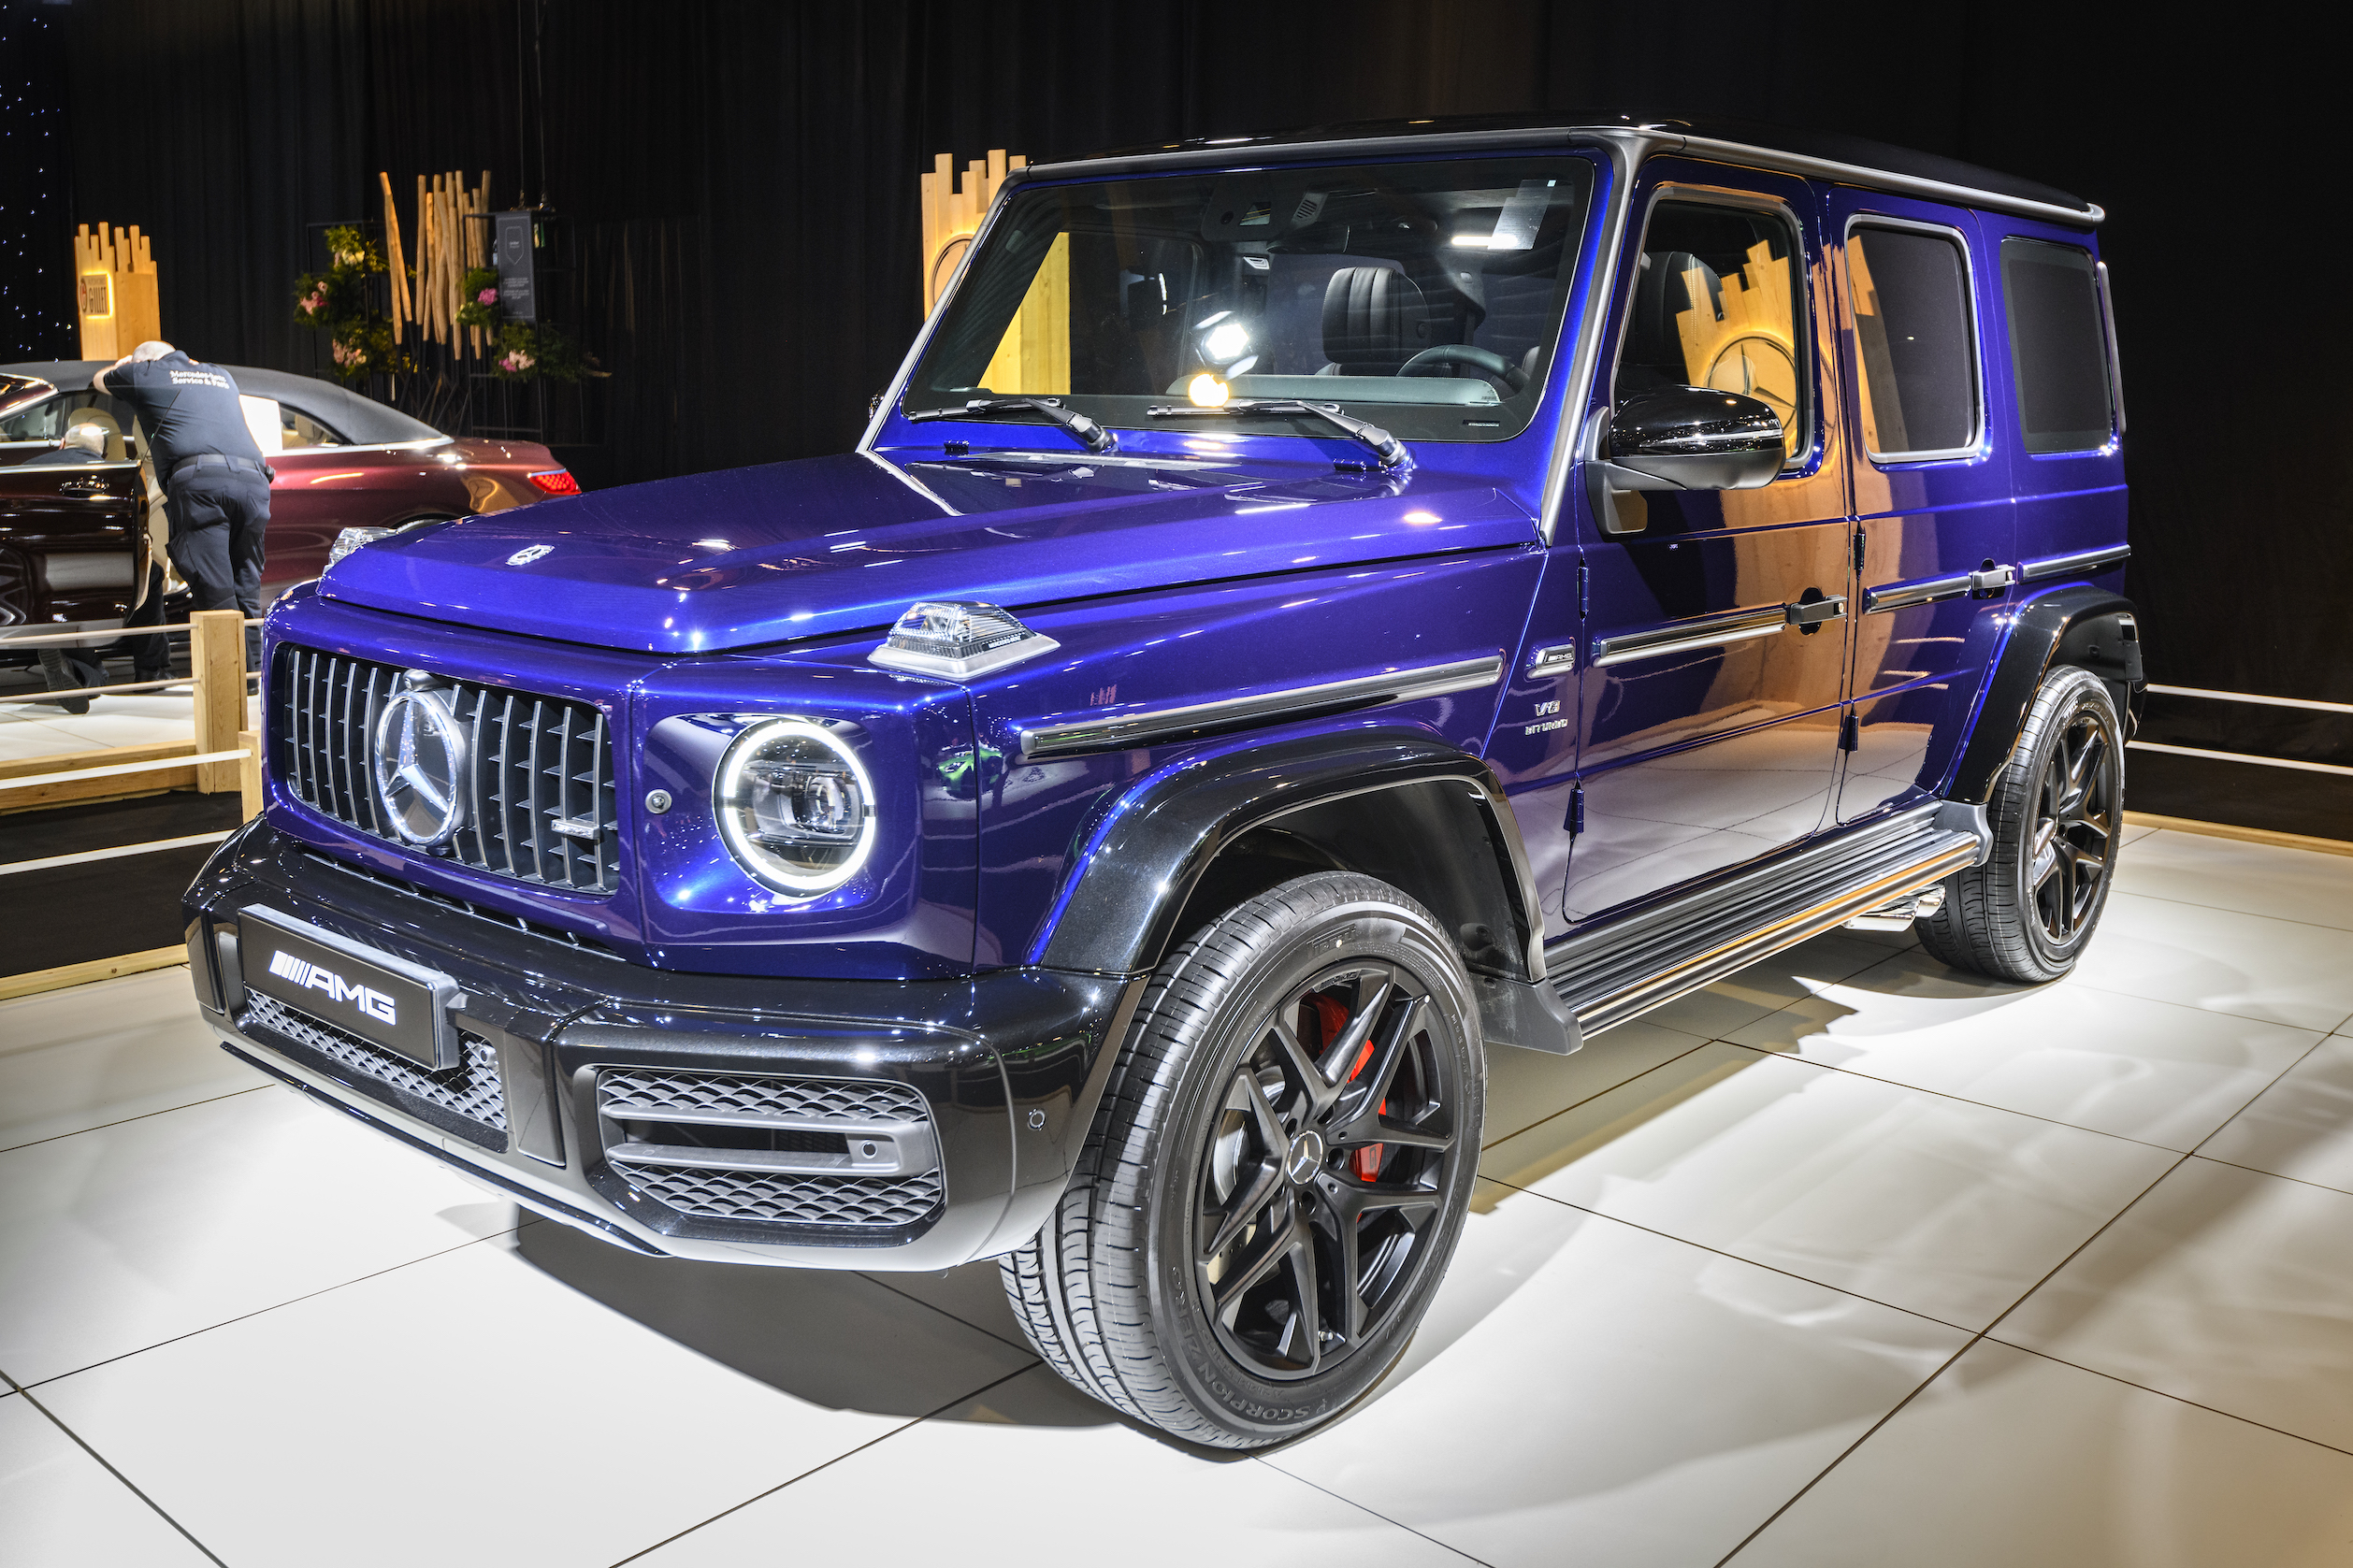 Mercedes-Benz G-Class G 63 AMG on display at Brussels Expo